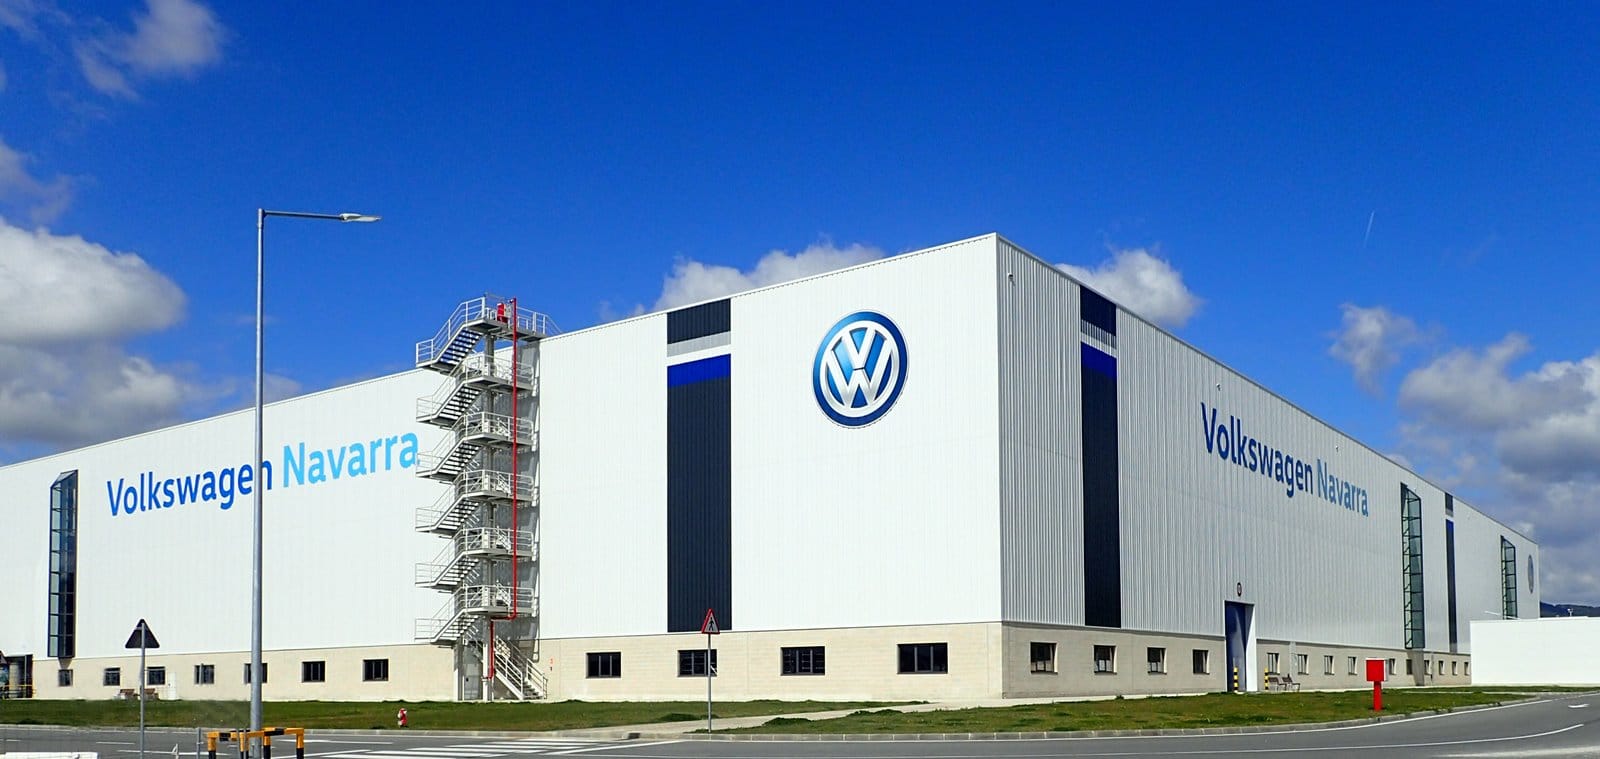 The lack of semiconductors forces the closure of VW Navarra